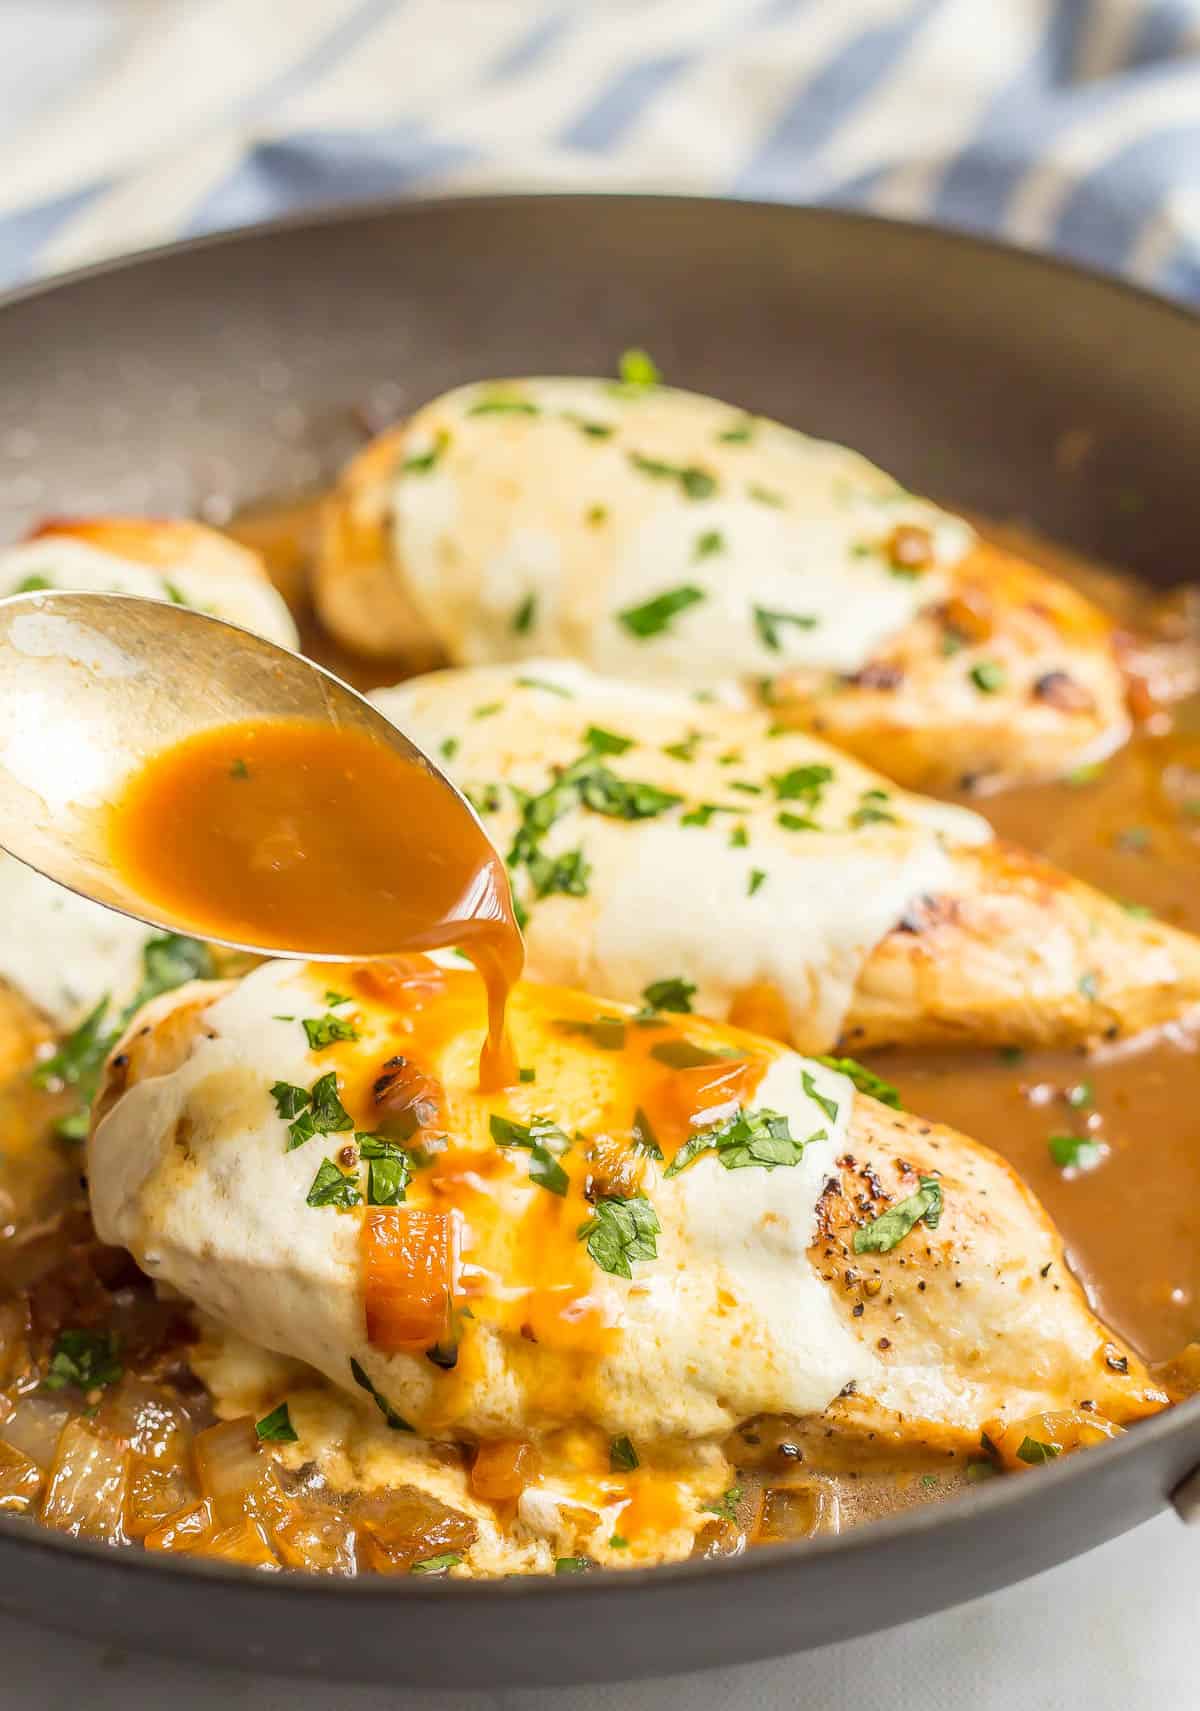 A spoon pouring pan juices over a mozzarella cheese covered chicken breast in a pan after baking.